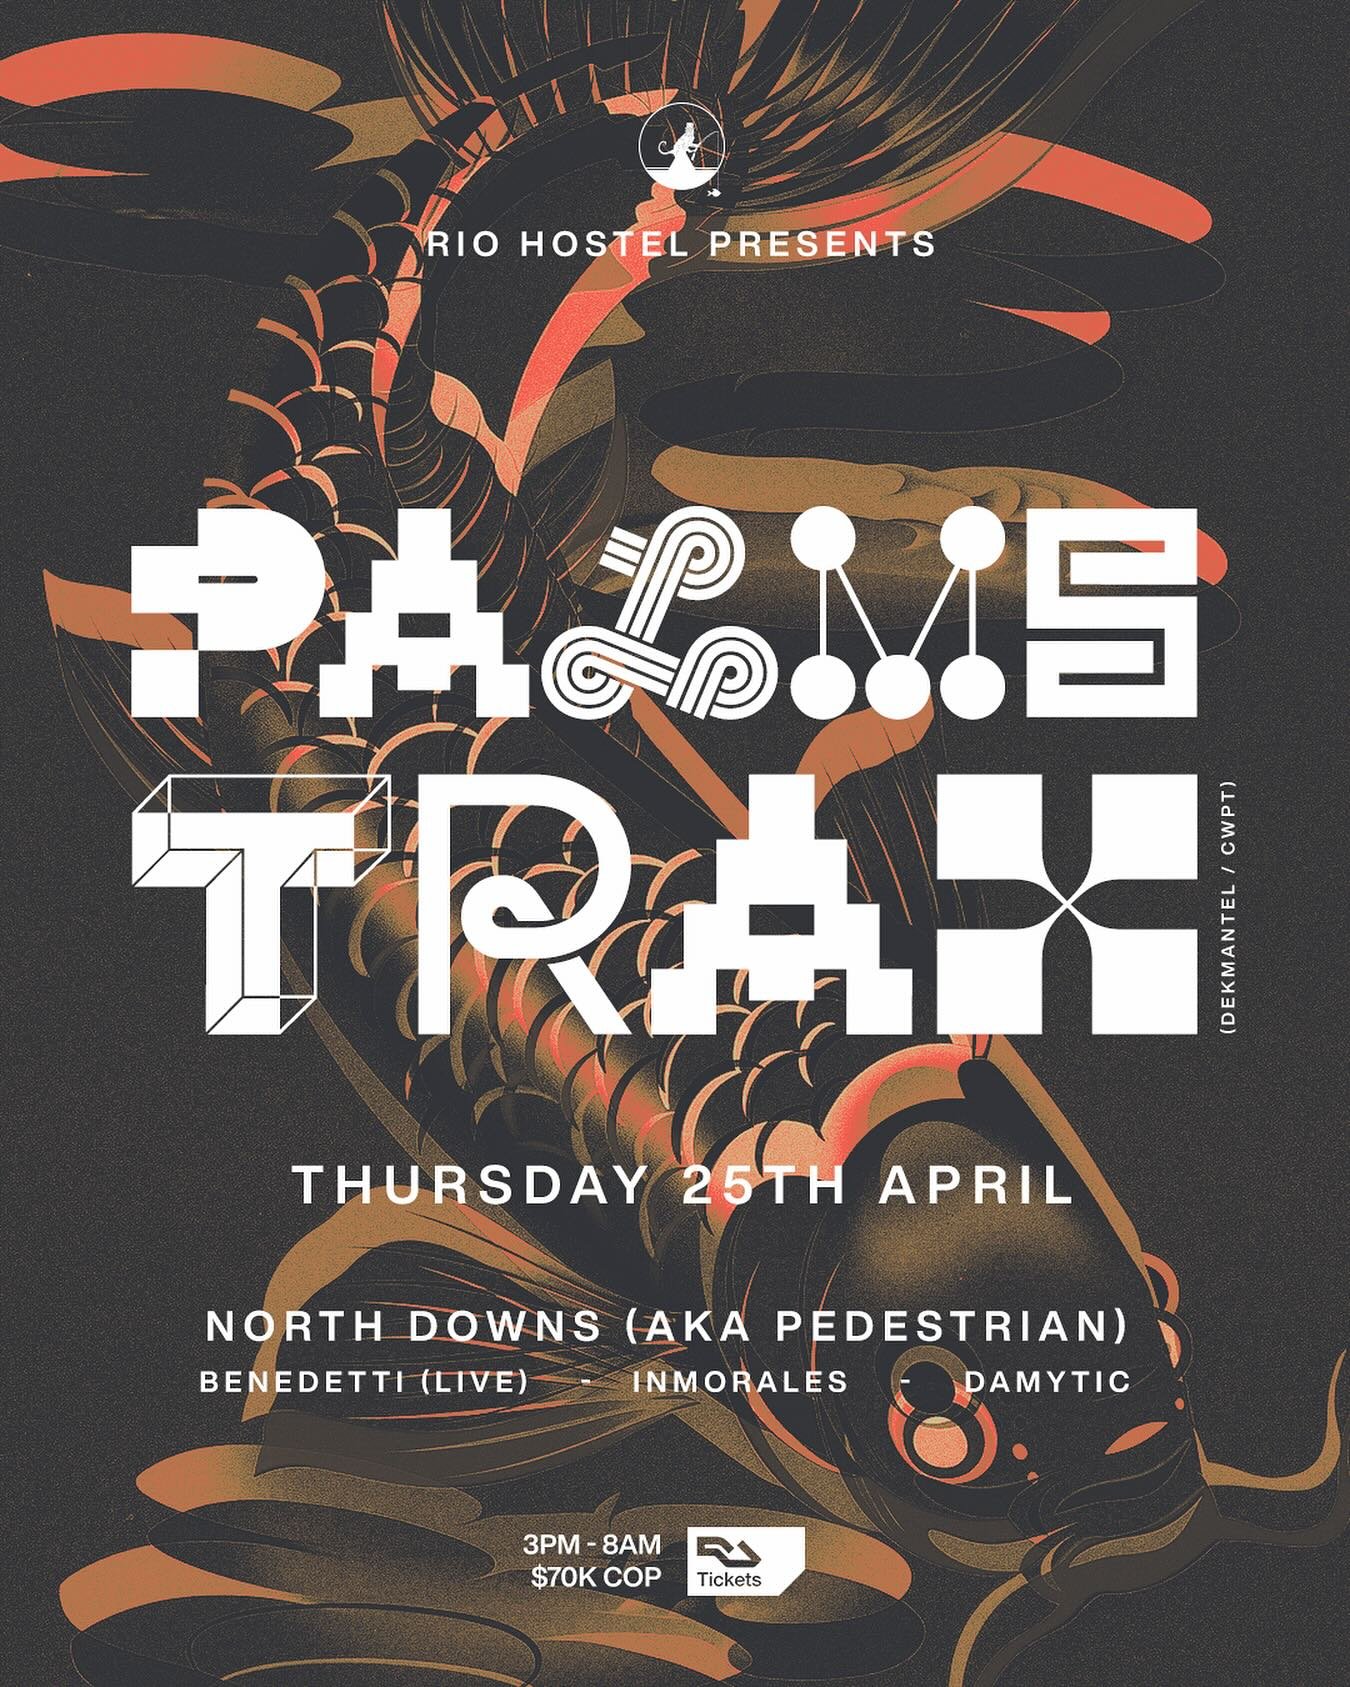 Following on from last nights sonic journey with Dj Dustin, Session 4000 and more, we thought we would tell you about another all-nighter at your favourite riverside retreat coming up very soon.&nbsp;

Palms Trax, for most, needs no introduction. Fro